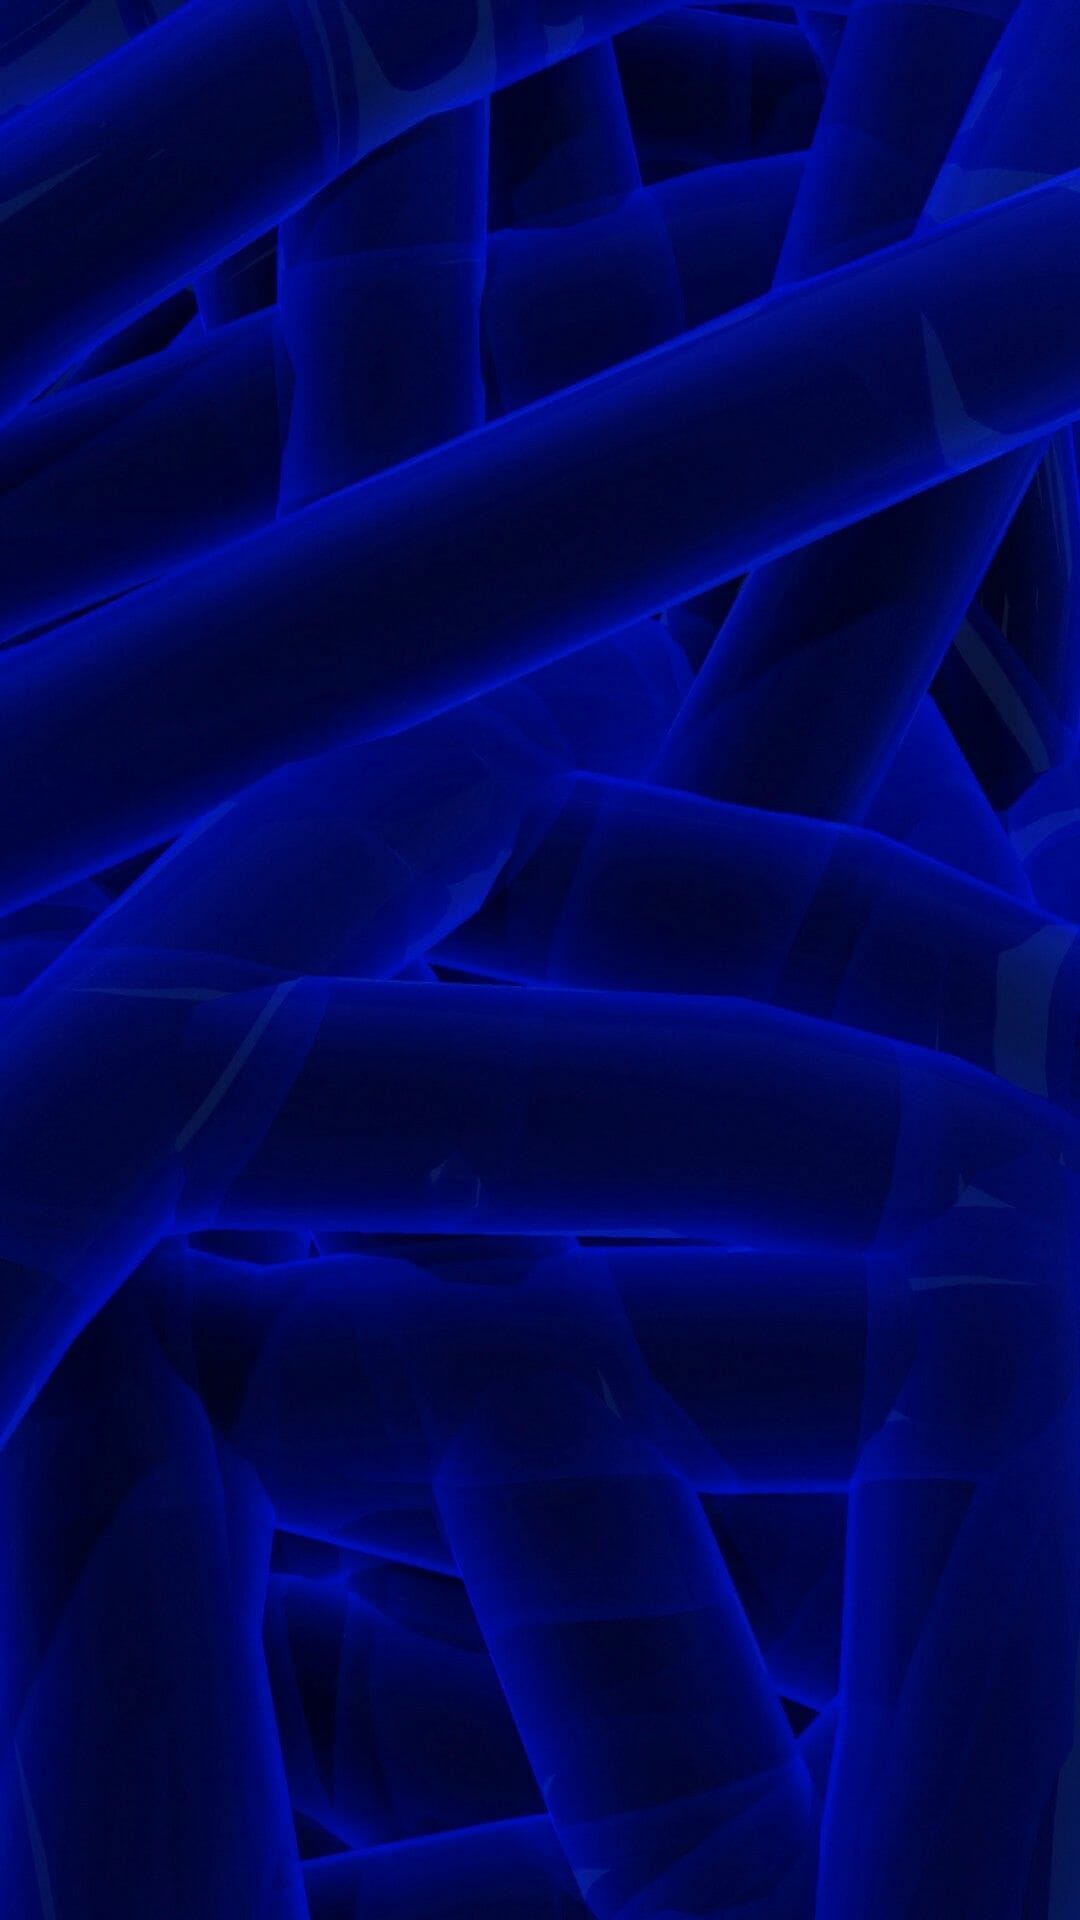 Blue abstract wallpaper for your iPhone from Vibe app - Neon blue, dark blue